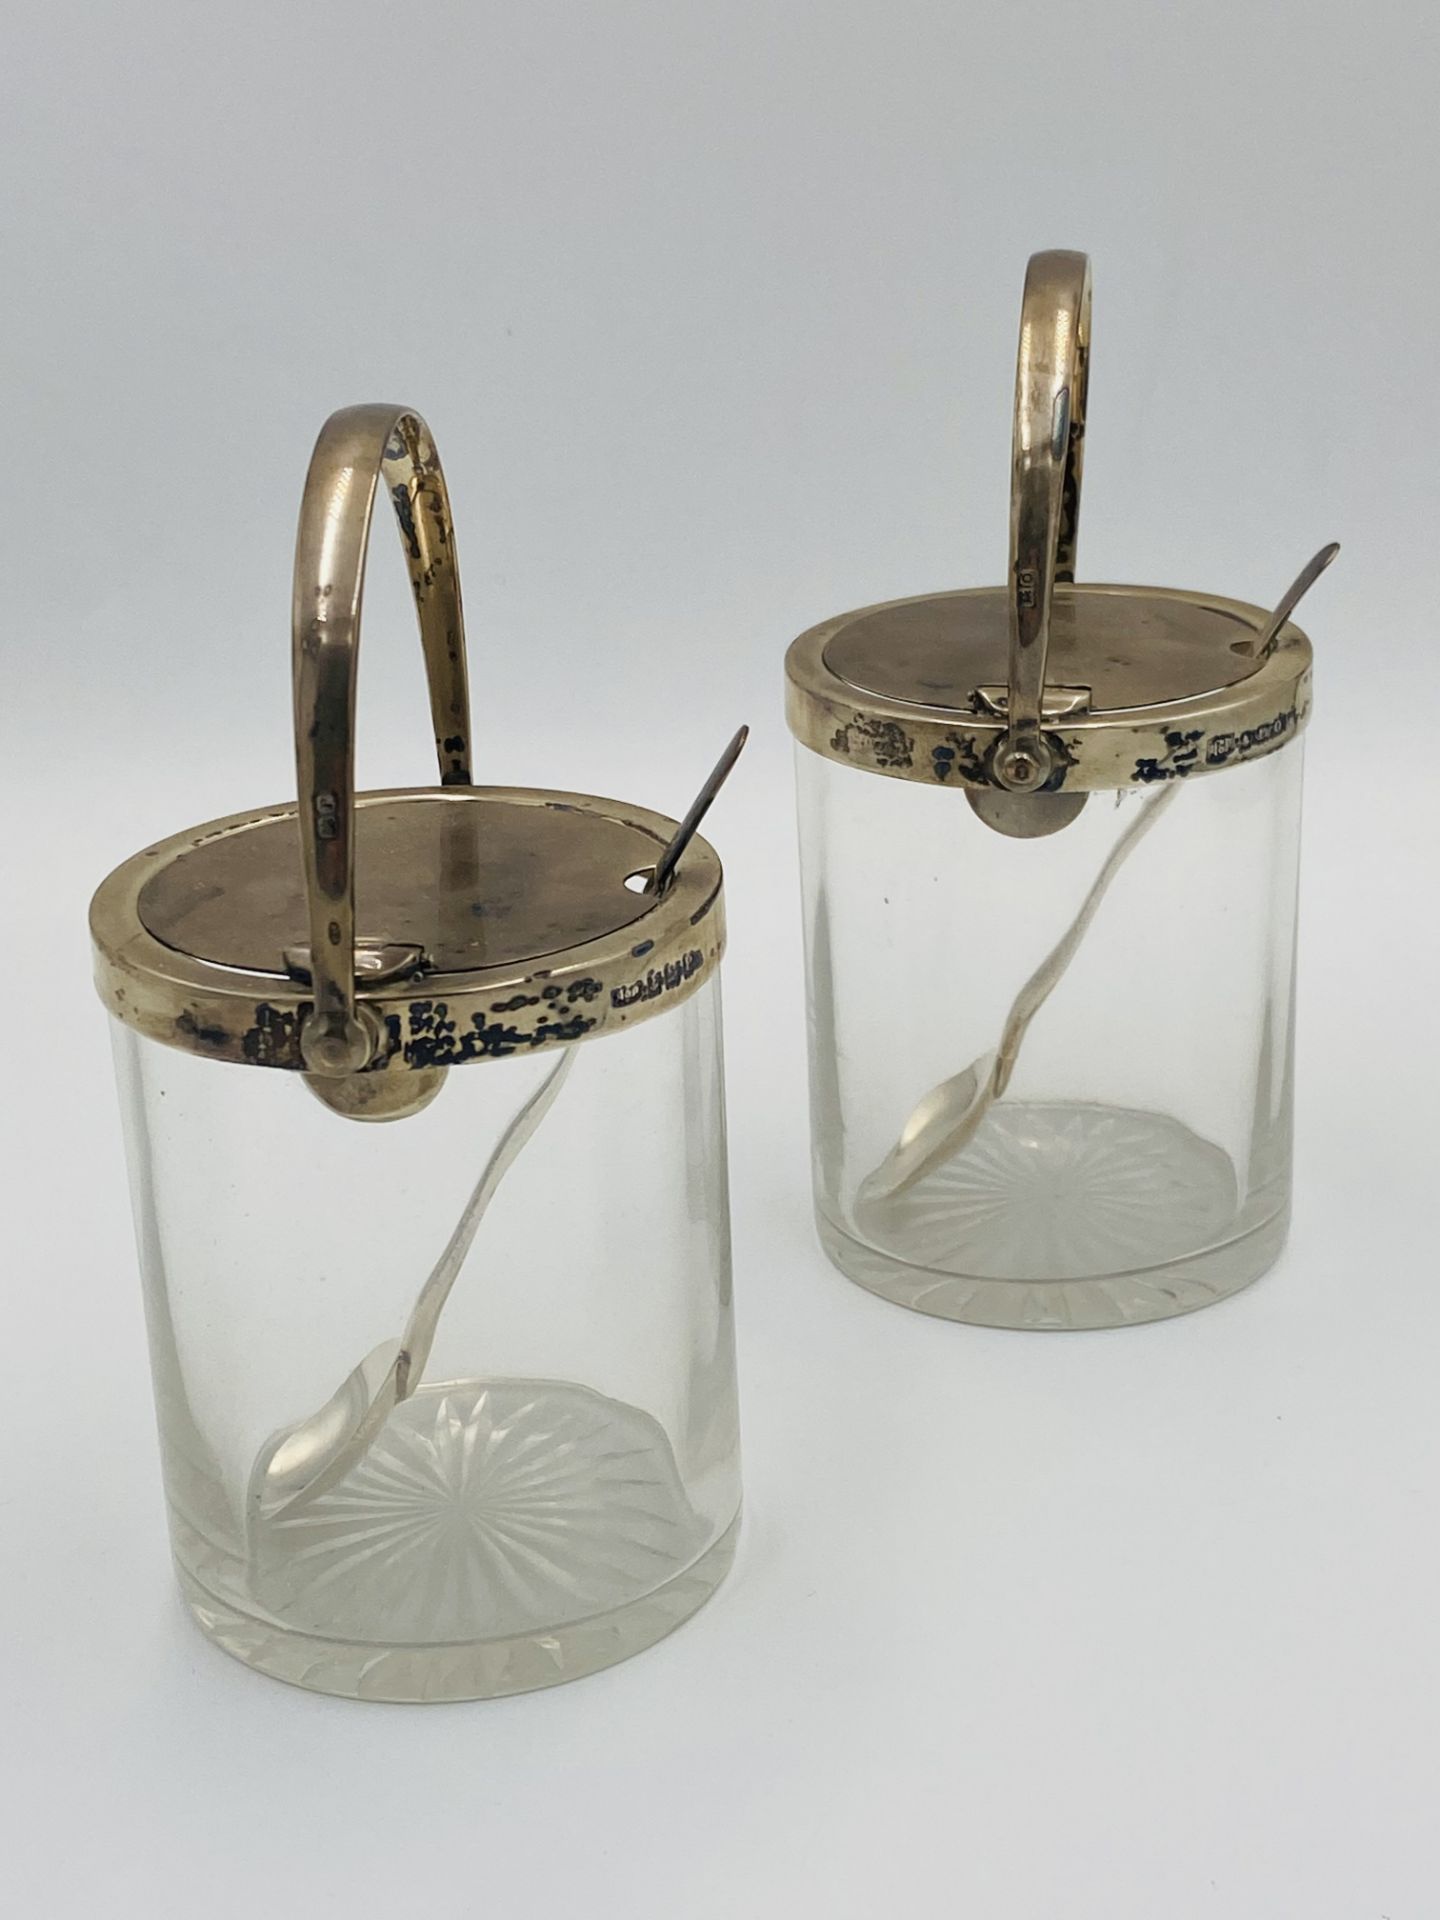 Pair of silver mounted, glass preserve jars with star cut bases